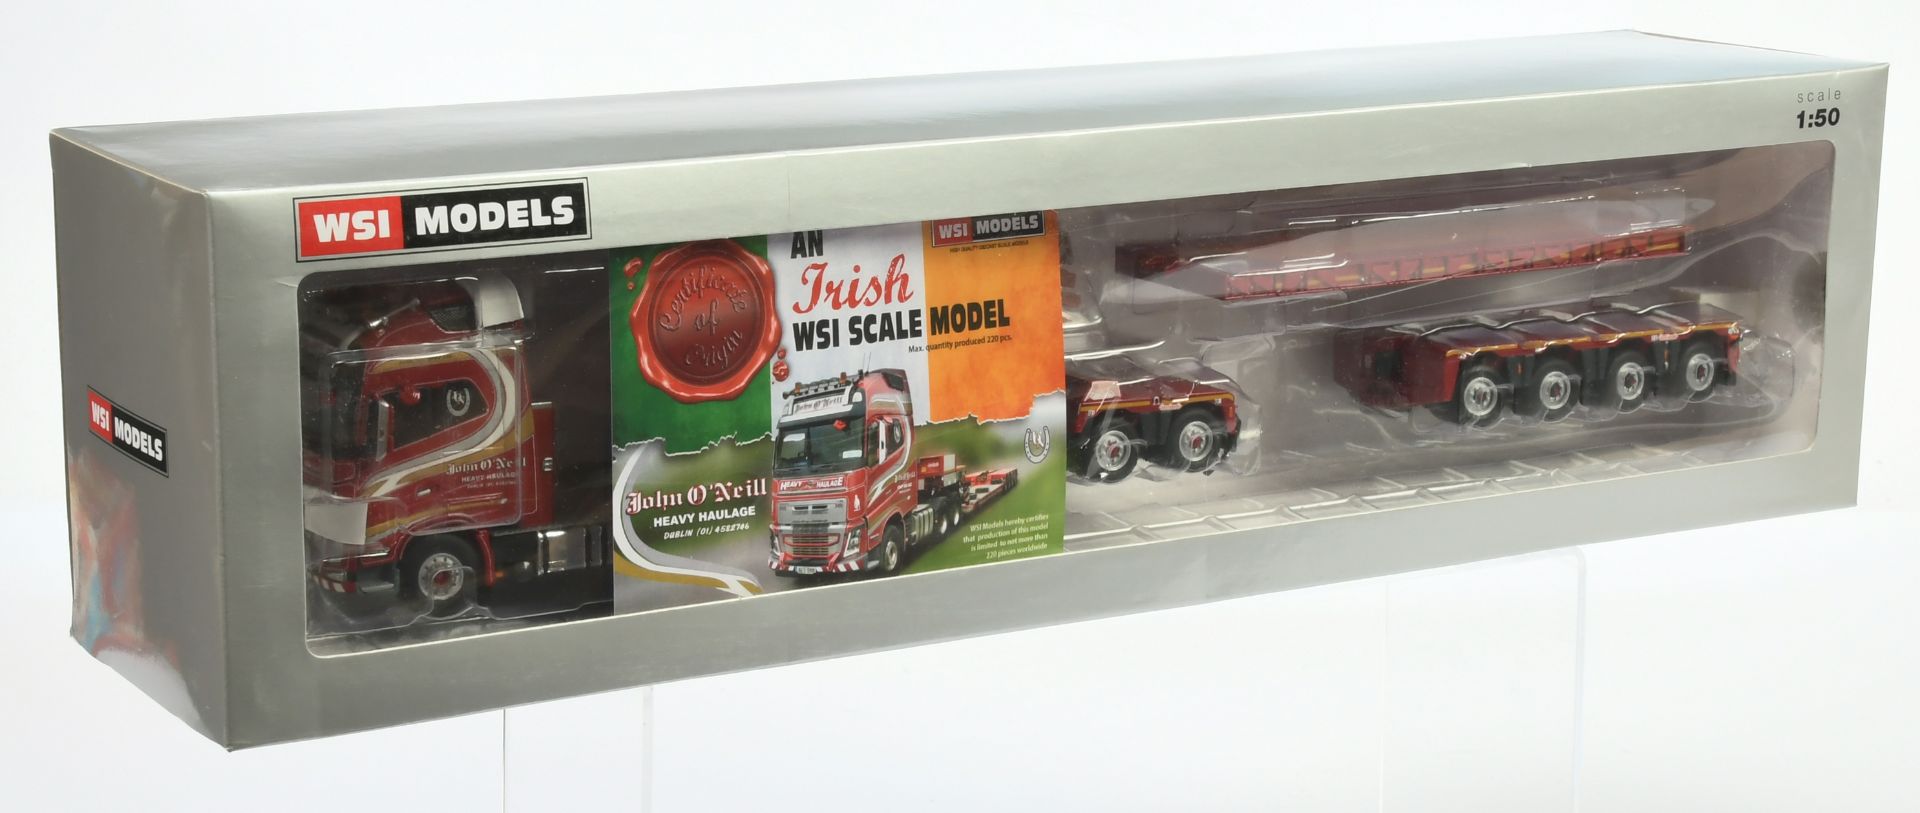 WSI Models (1/50th) 01-2204  Volvo FH4 "John O'Neill"  with certificate - Mint in a Excellent win...